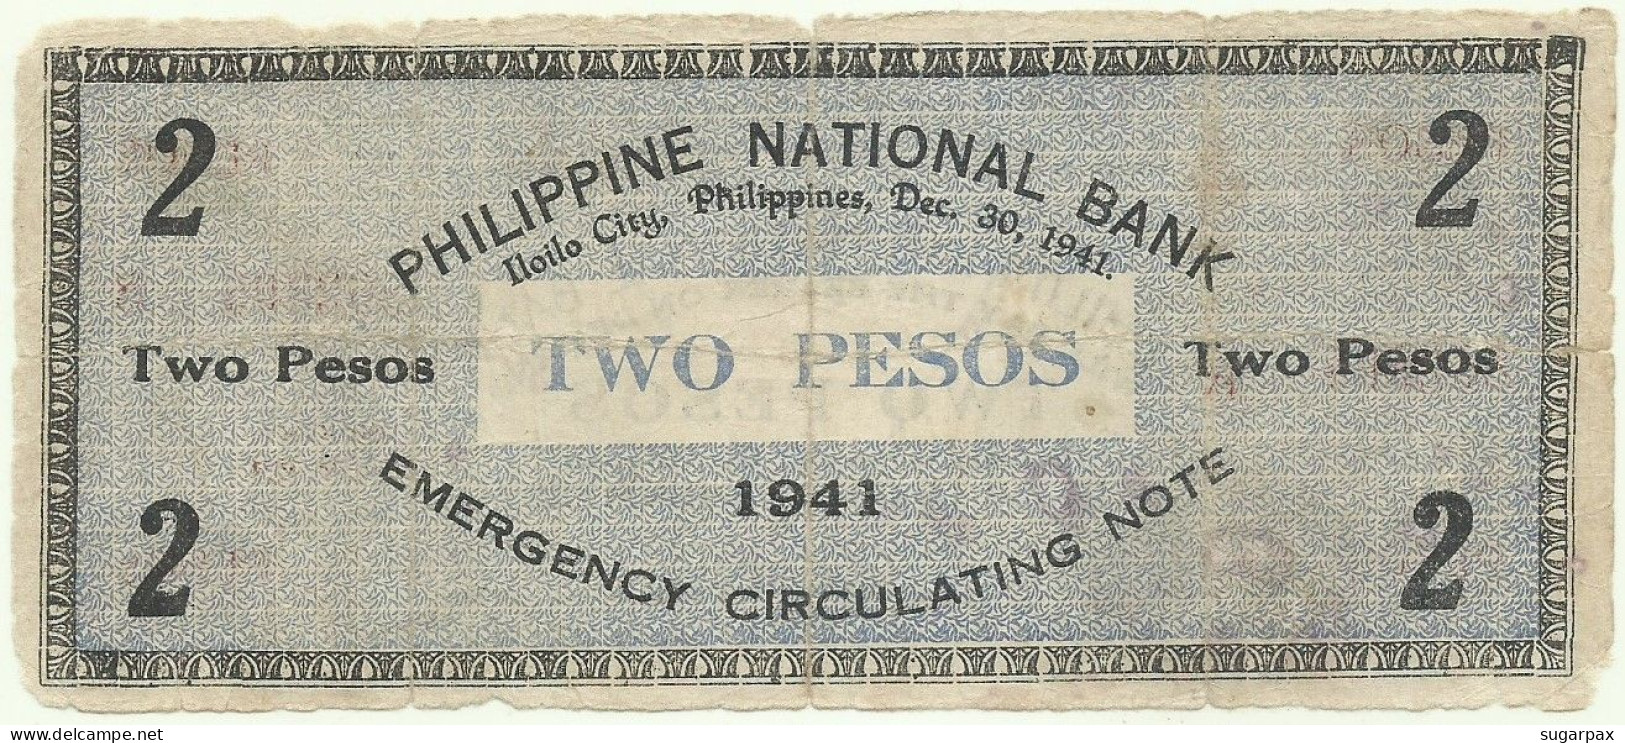 PHILIPPINES - 2 Pesos - 1941 - Pick S 306 - Serie R - ILOILO Currency Committee - Filipinas